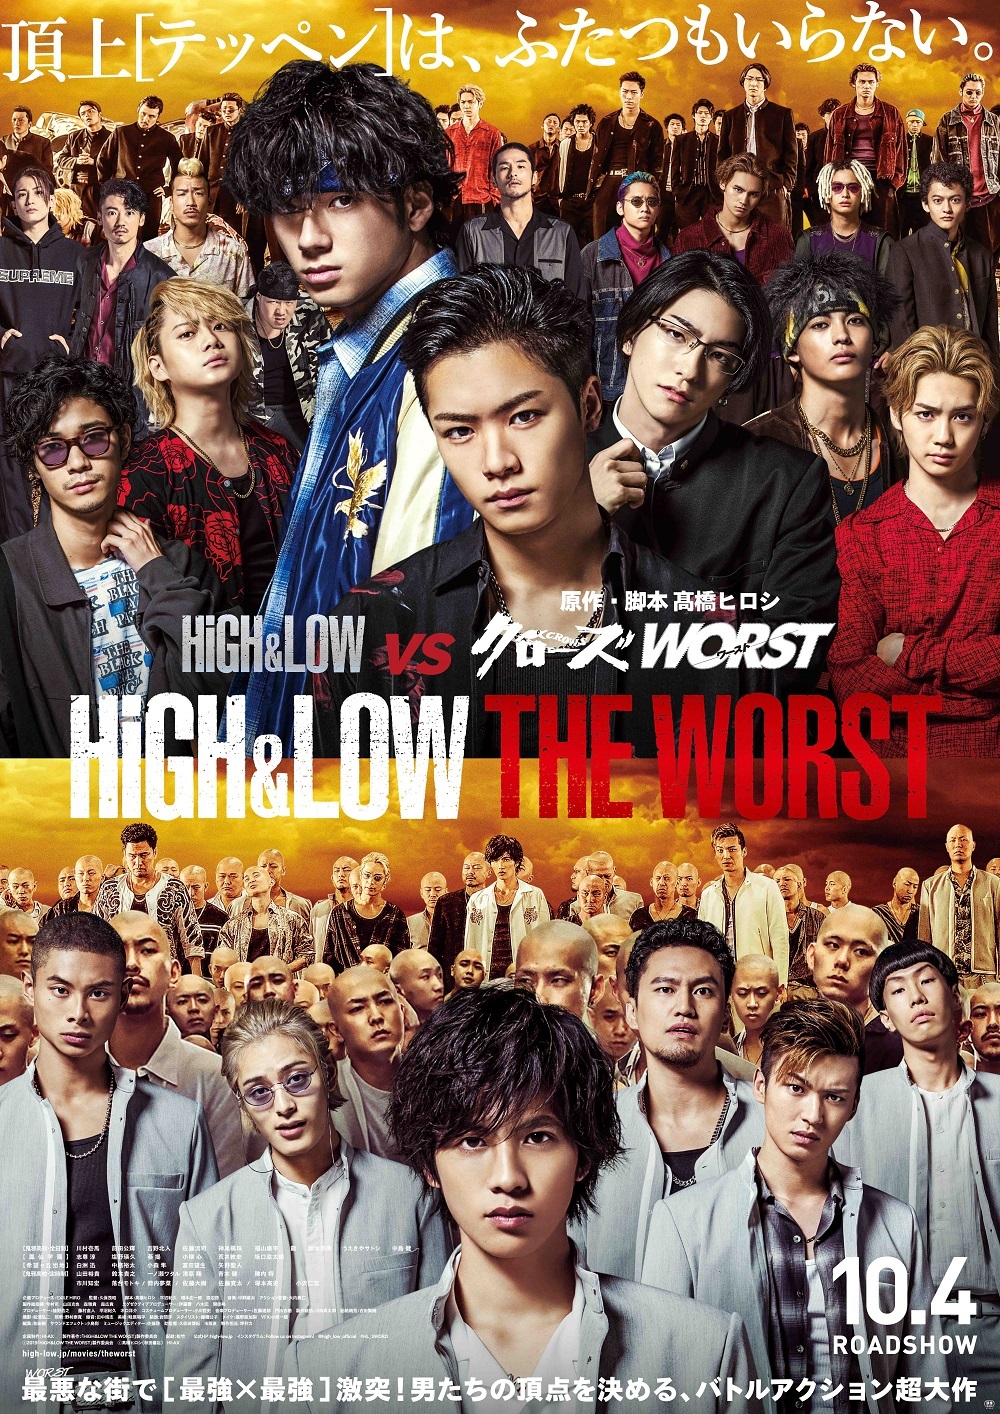 High Low The Worst 本予告編でthe Rampage川村壱馬 山田裕貴 志尊